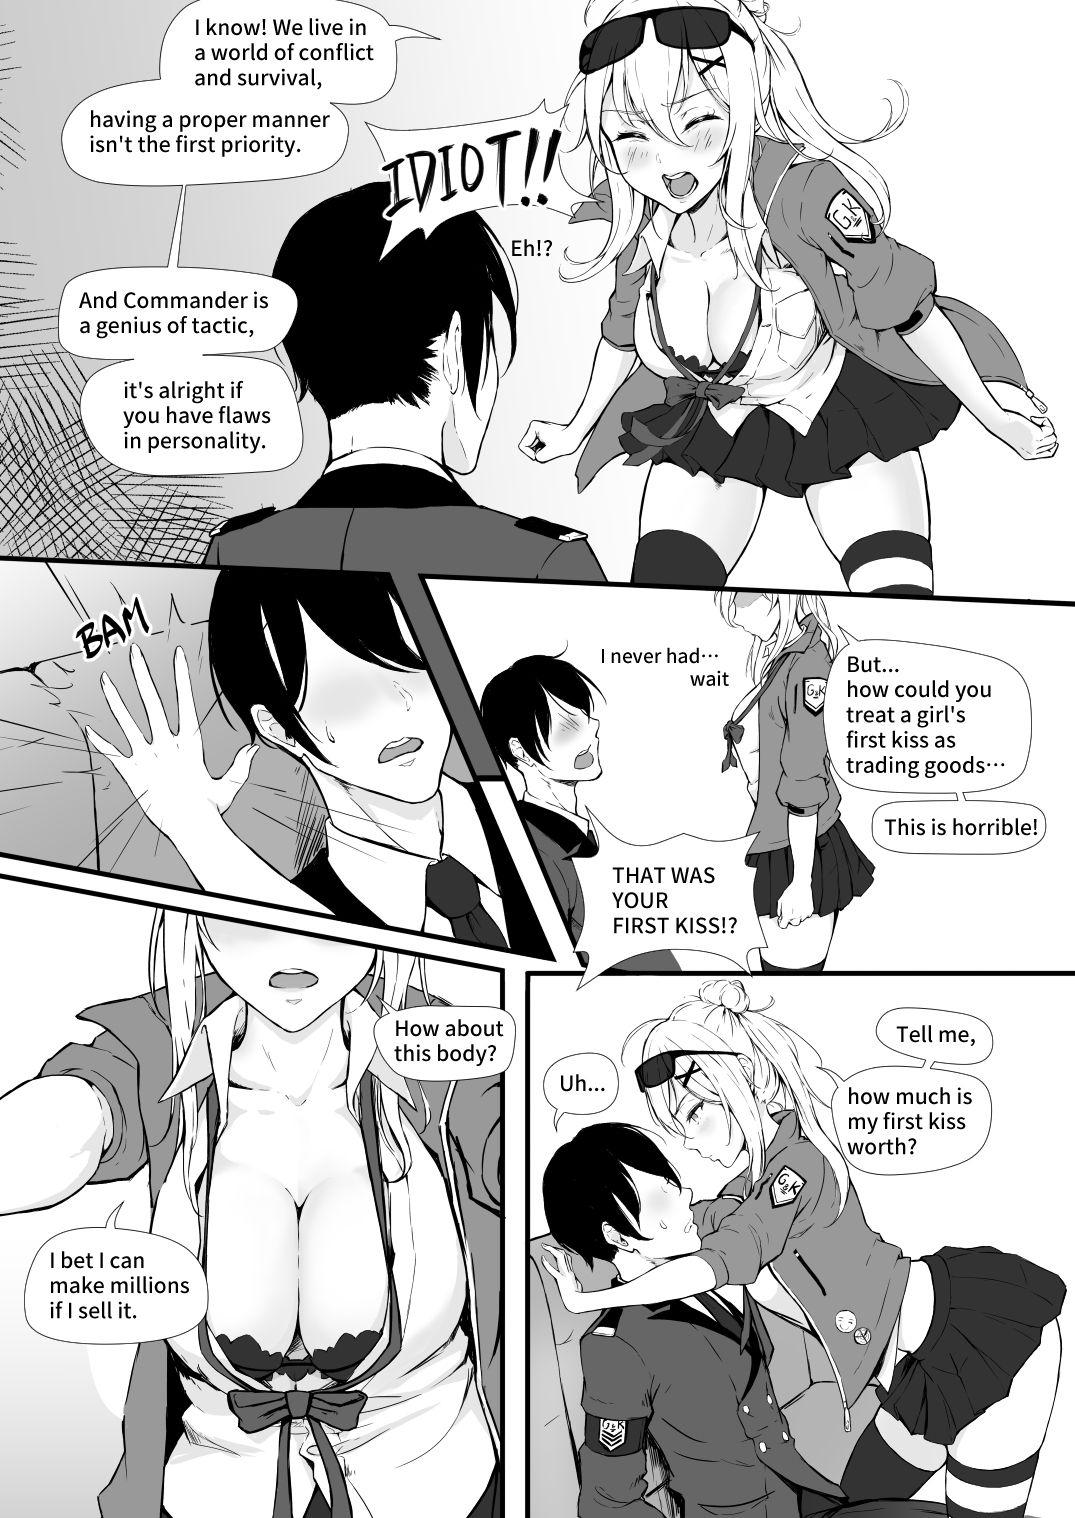 Solo Girl How Many Diamonds a Kiss Worth? - Girls frontline Cop - Page 9